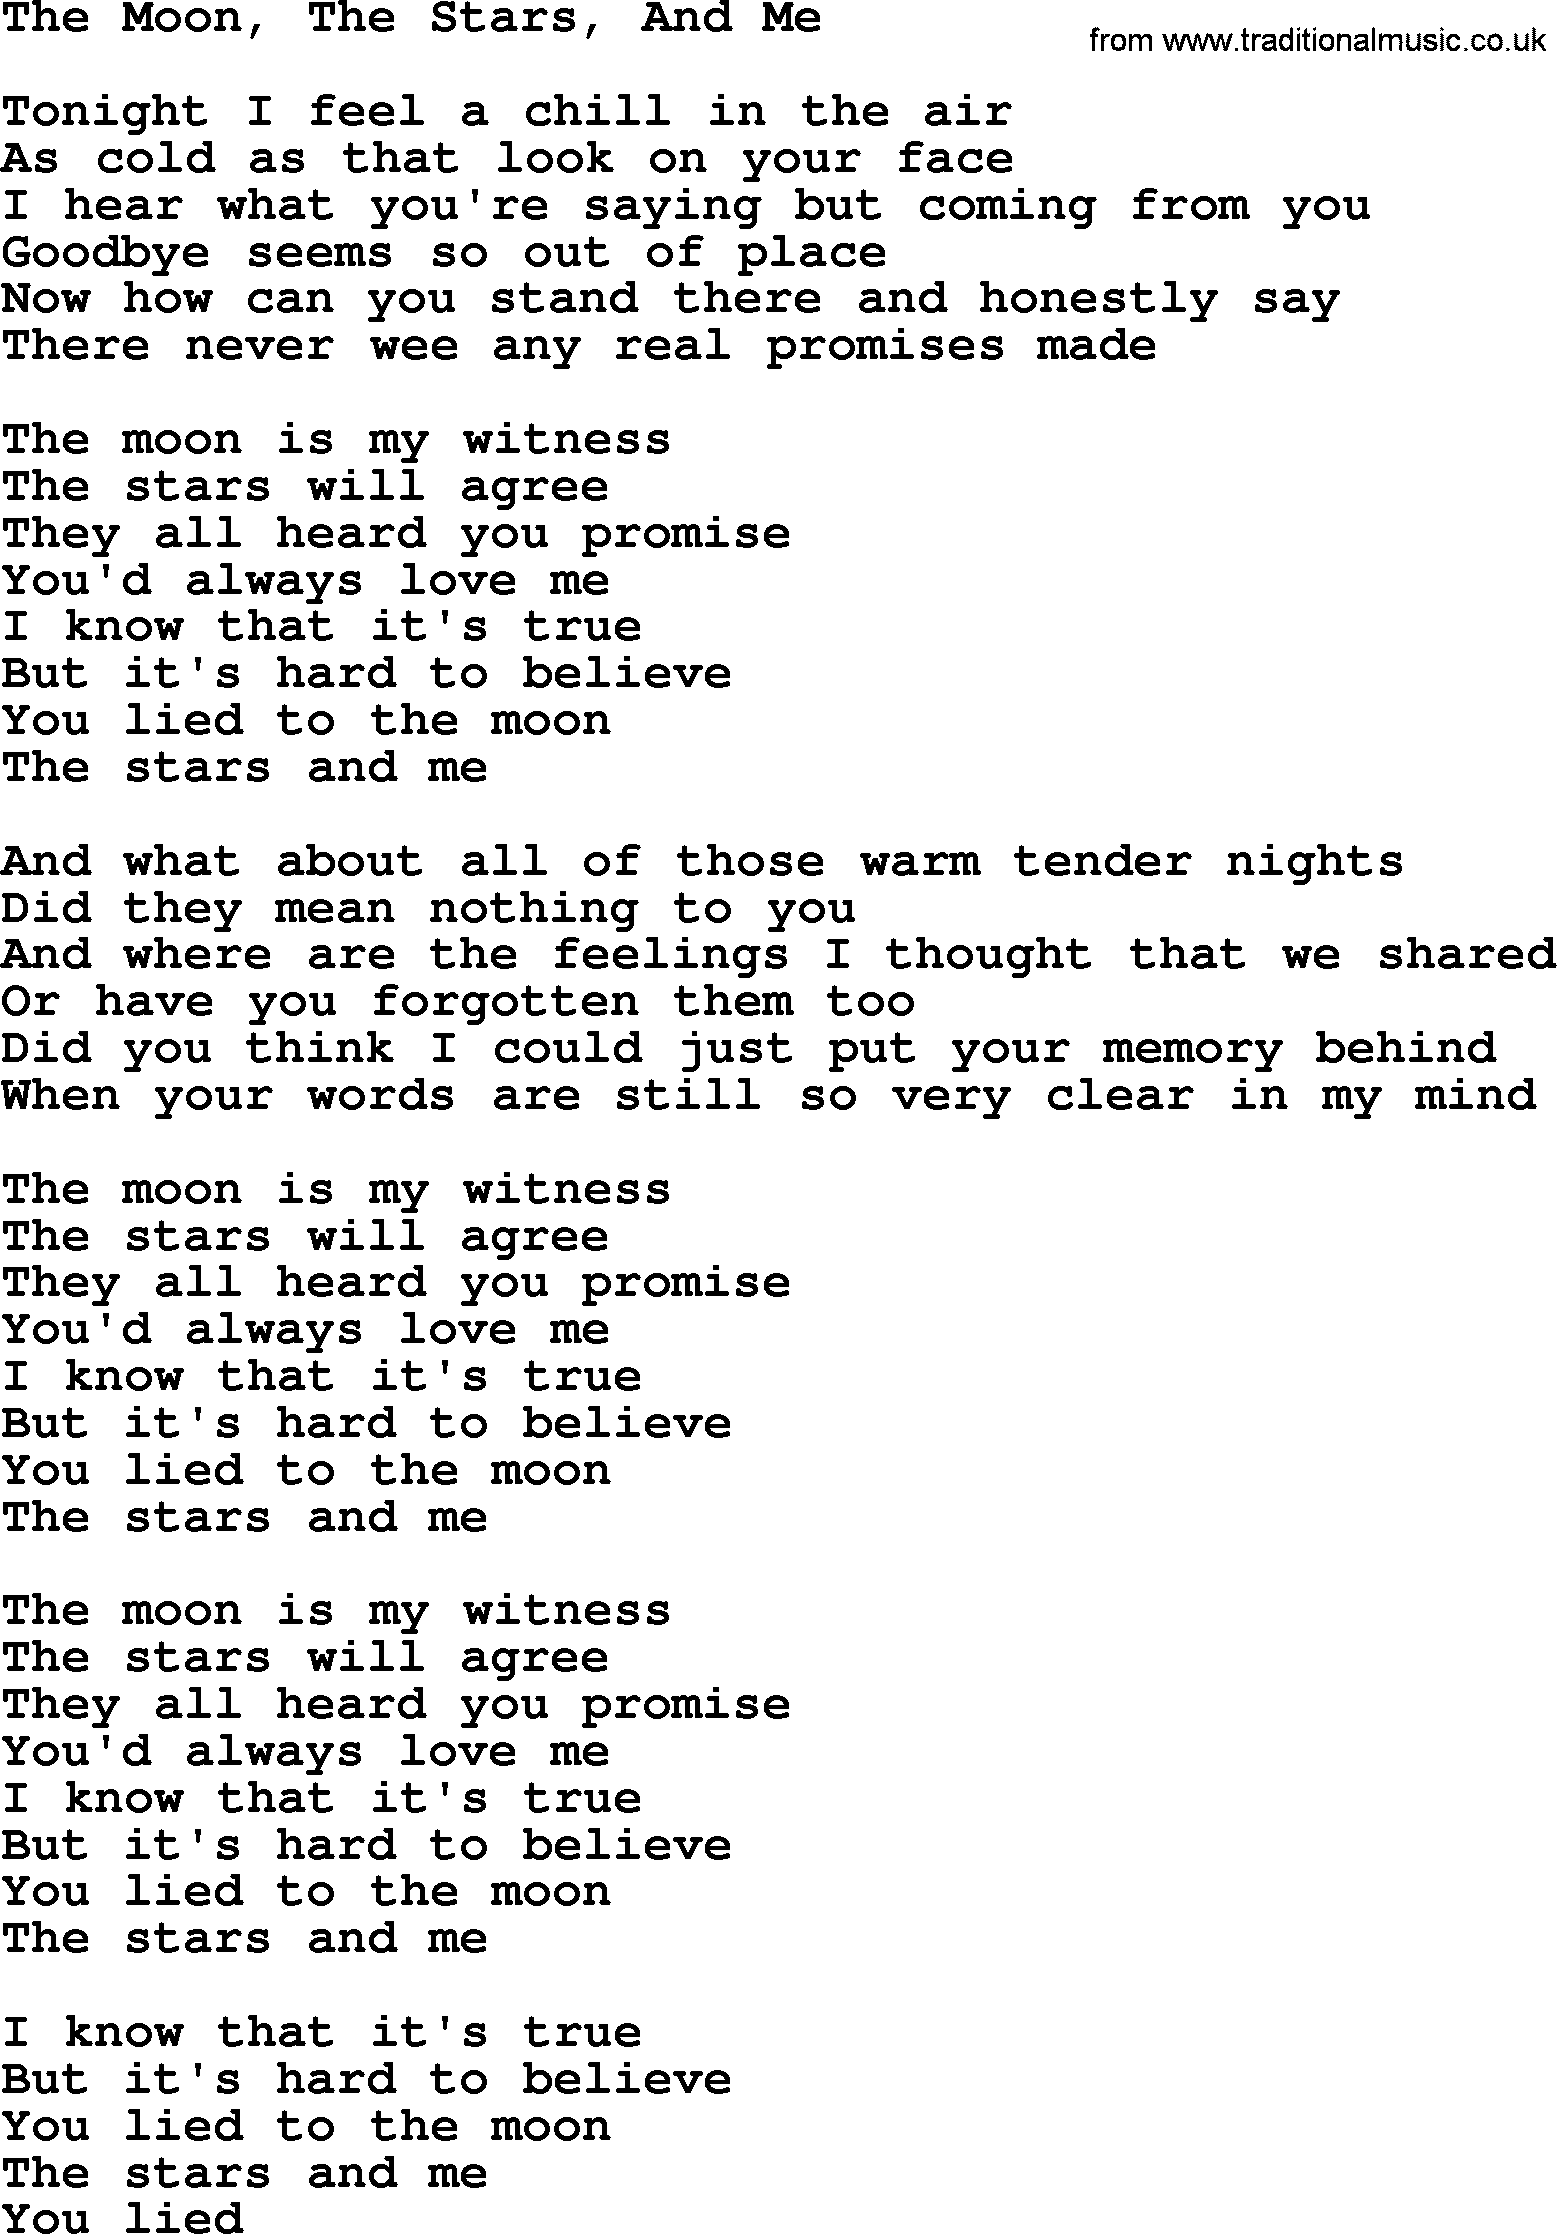 Dolly Parton song The Moon, The Stars, And Me.txt lyrics